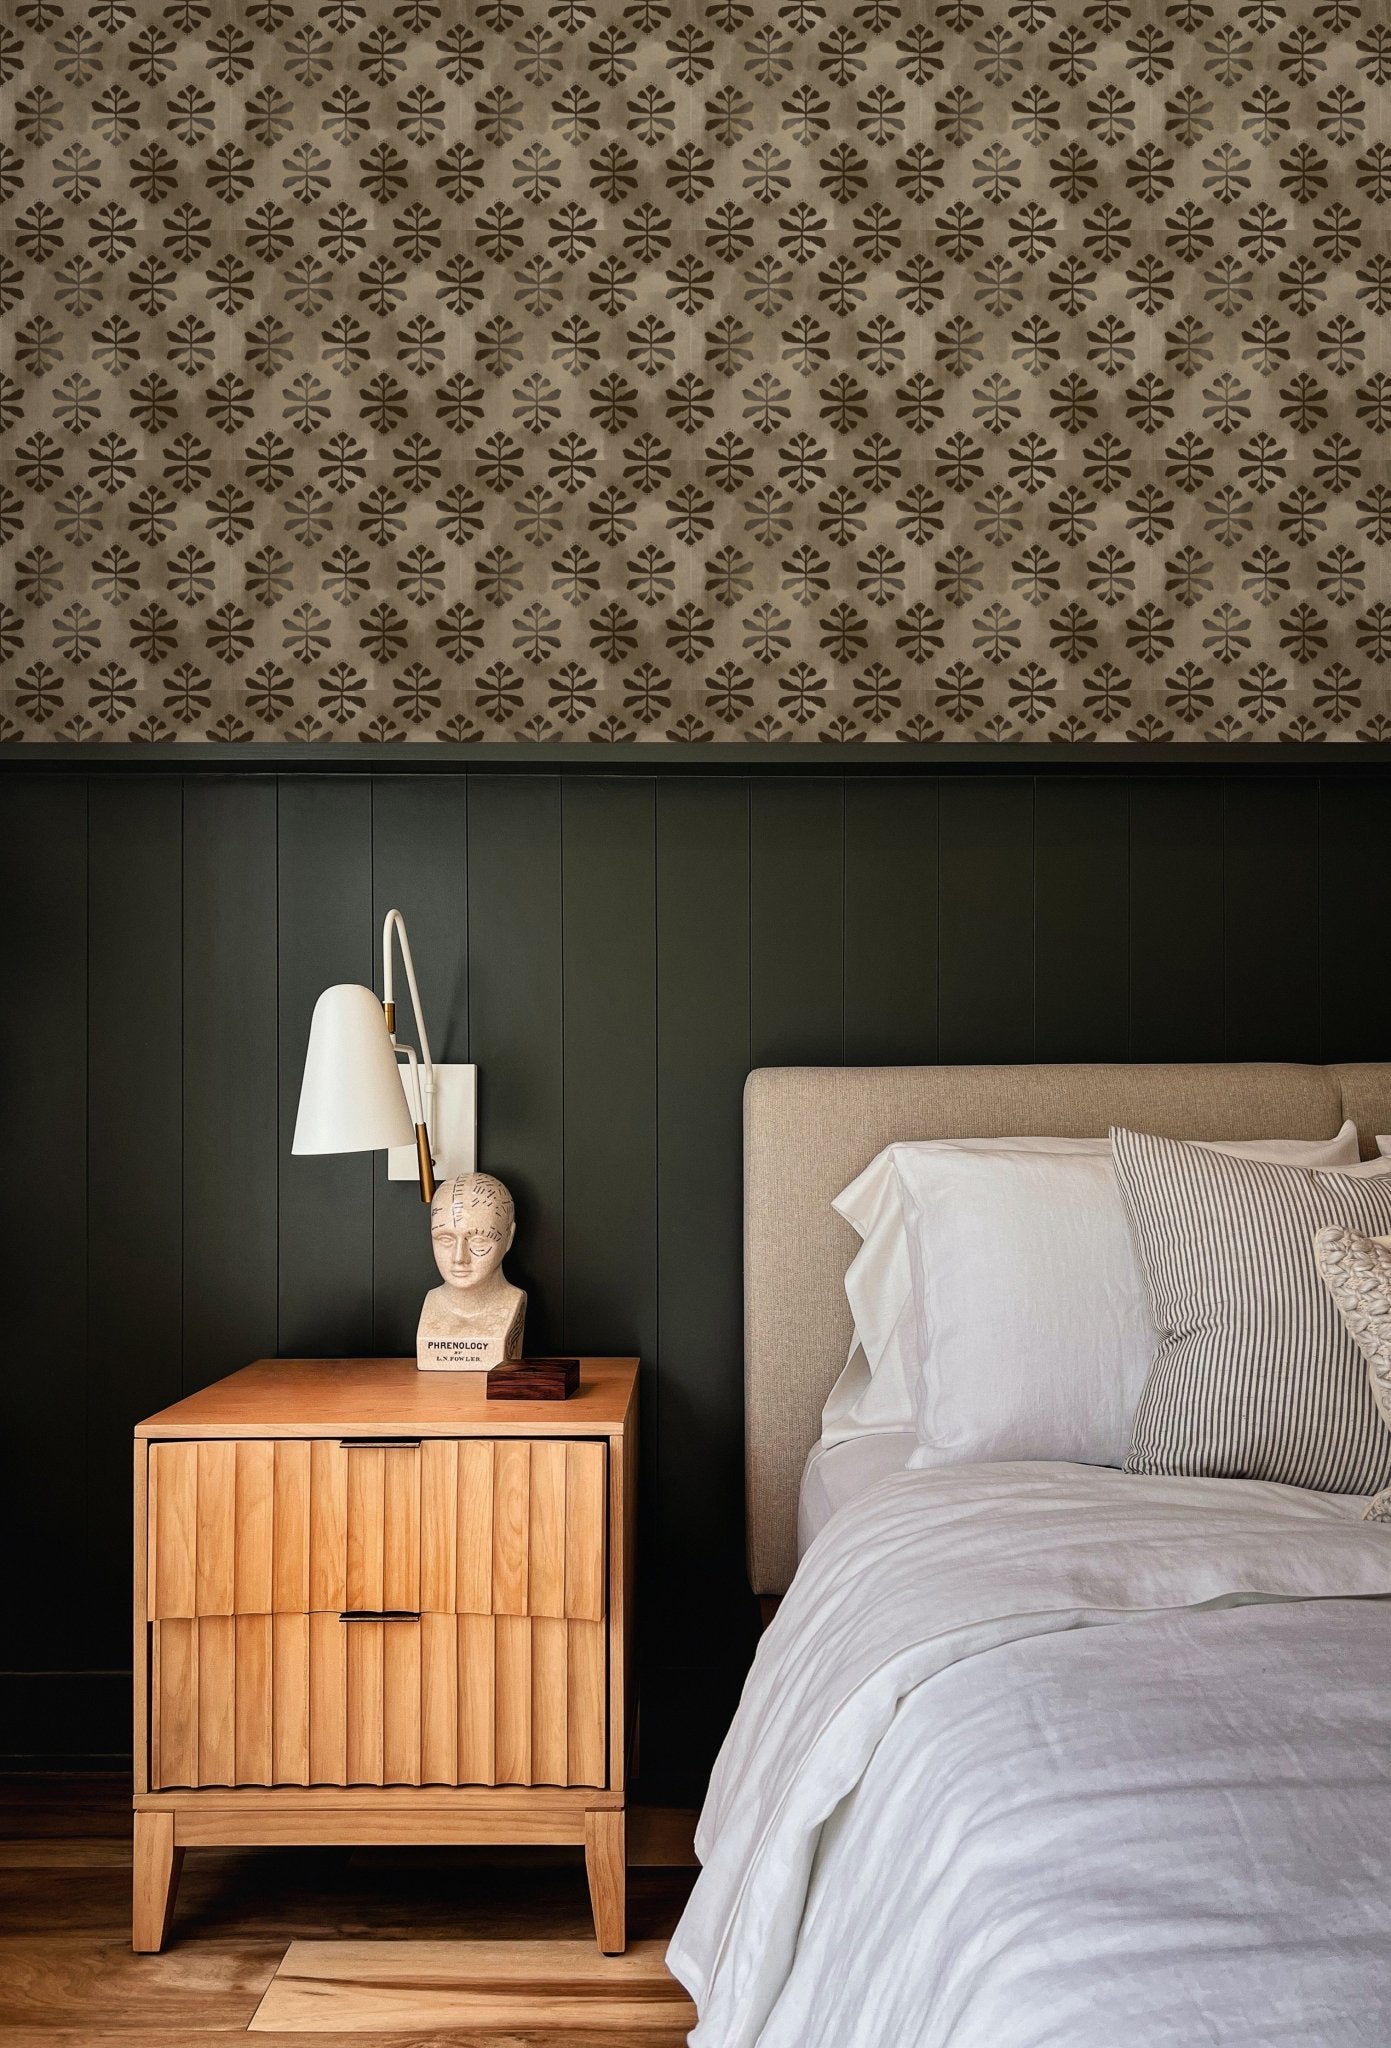 wallpaper above green wall treatment in bedroom with bed and side table